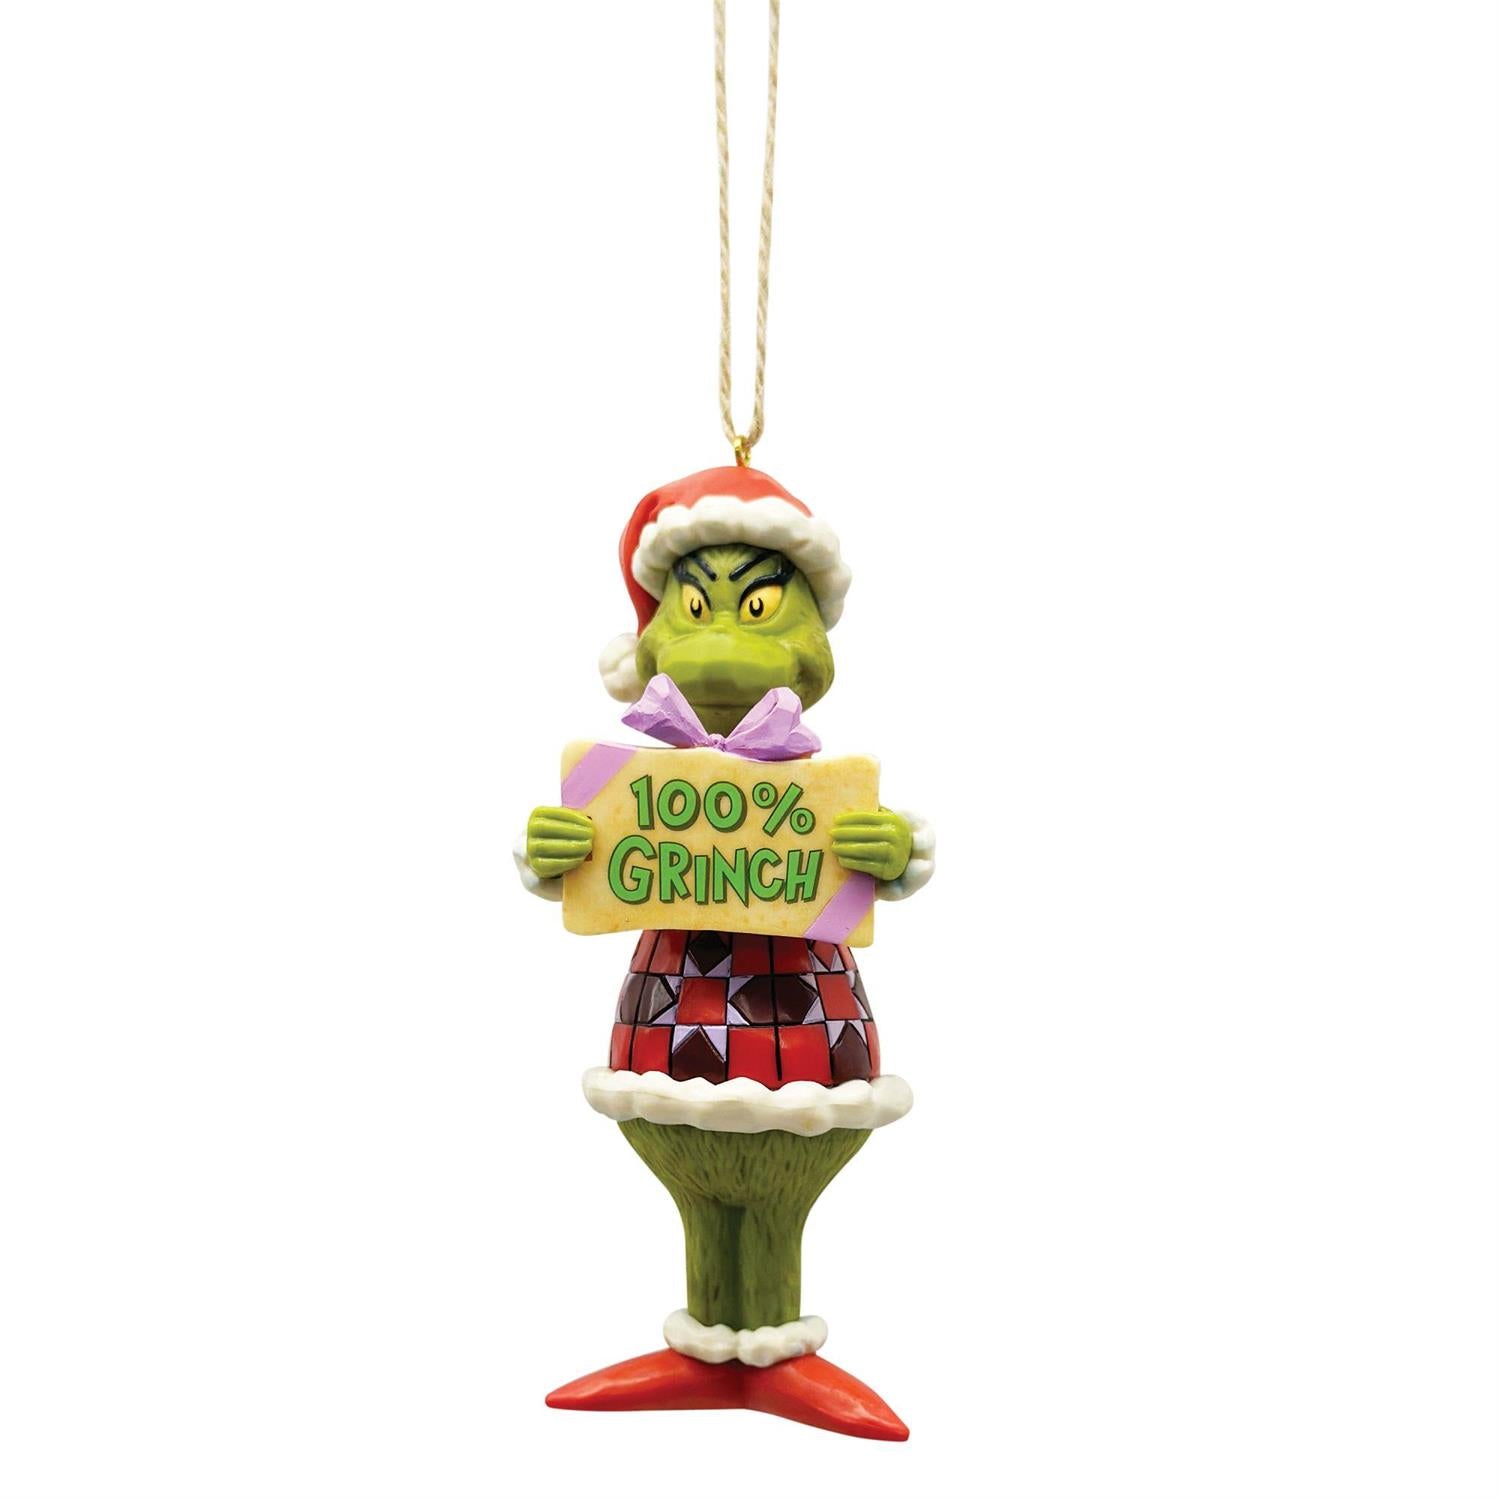 100% Grinch Christmas Ornament from Jim Shore 